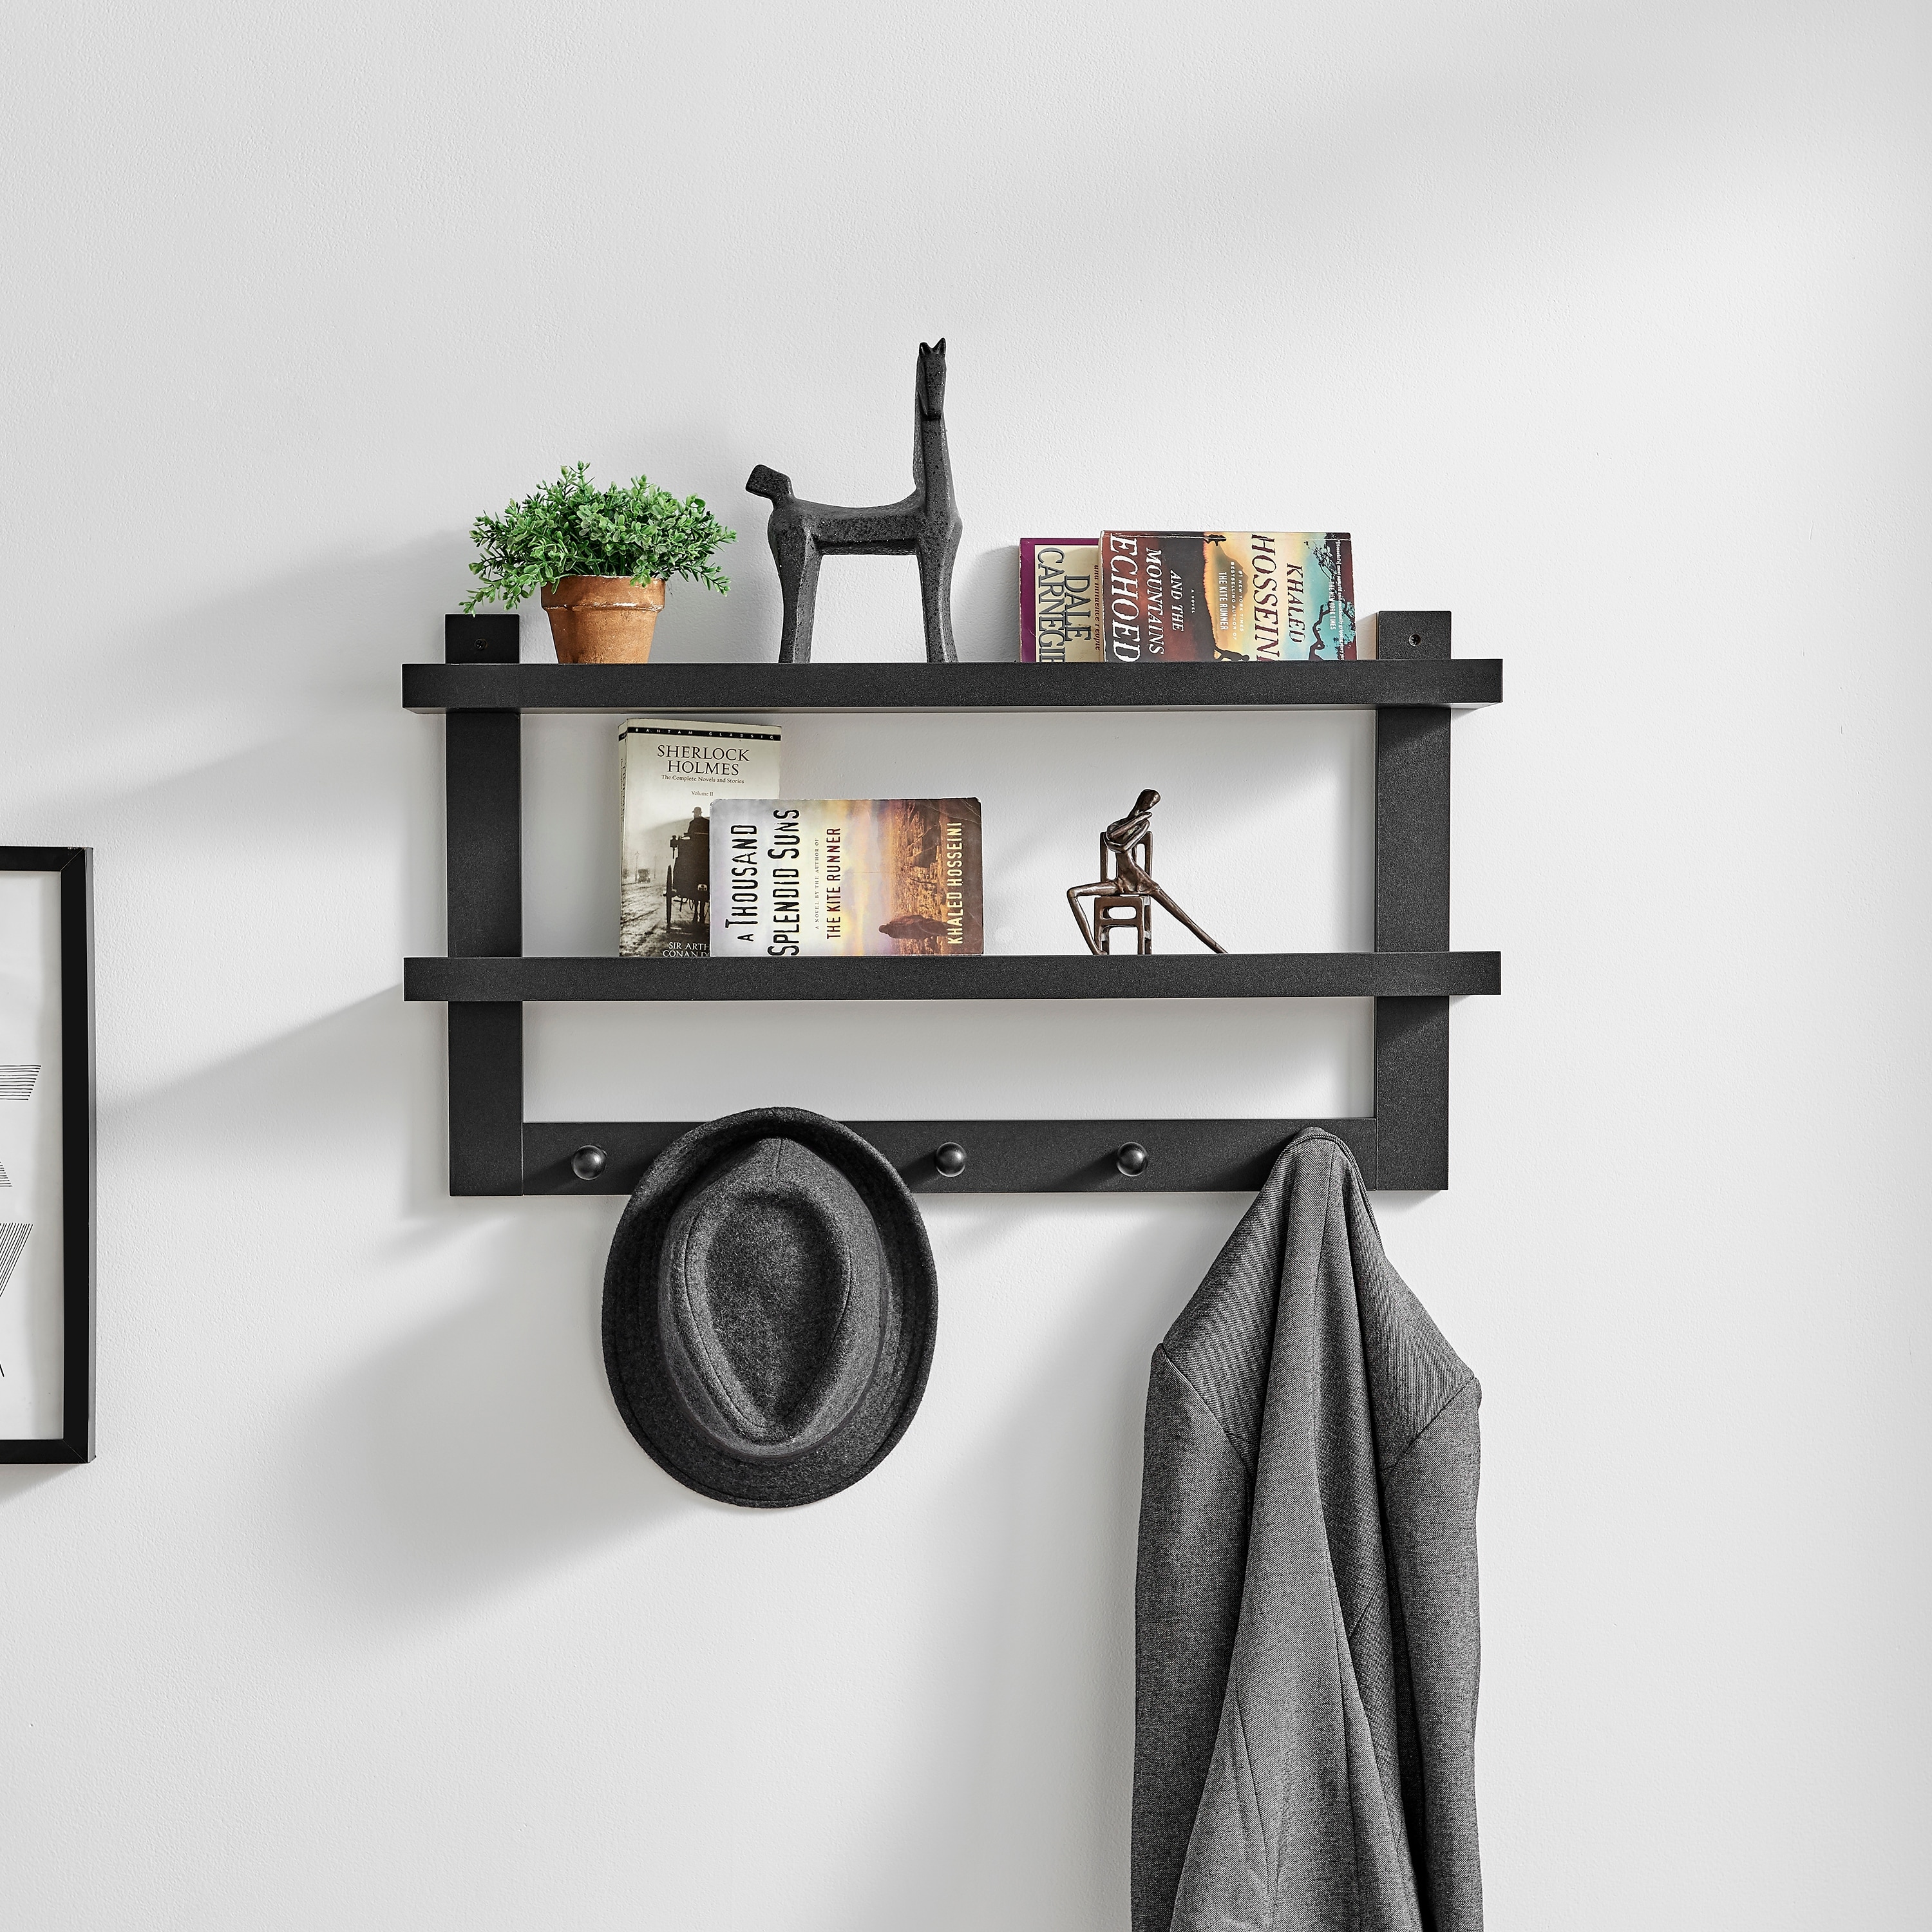 https://ak1.ostkcdn.com/images/products/is/images/direct/65ed8585cd94c1623f9a2f9b56a920b87049661d/Danya-B.-Two-Tier-Ledge-Shelf-Wall-Organizer-with-Five-Hanging-Hooks---Entryway-or-Bathroom.jpg